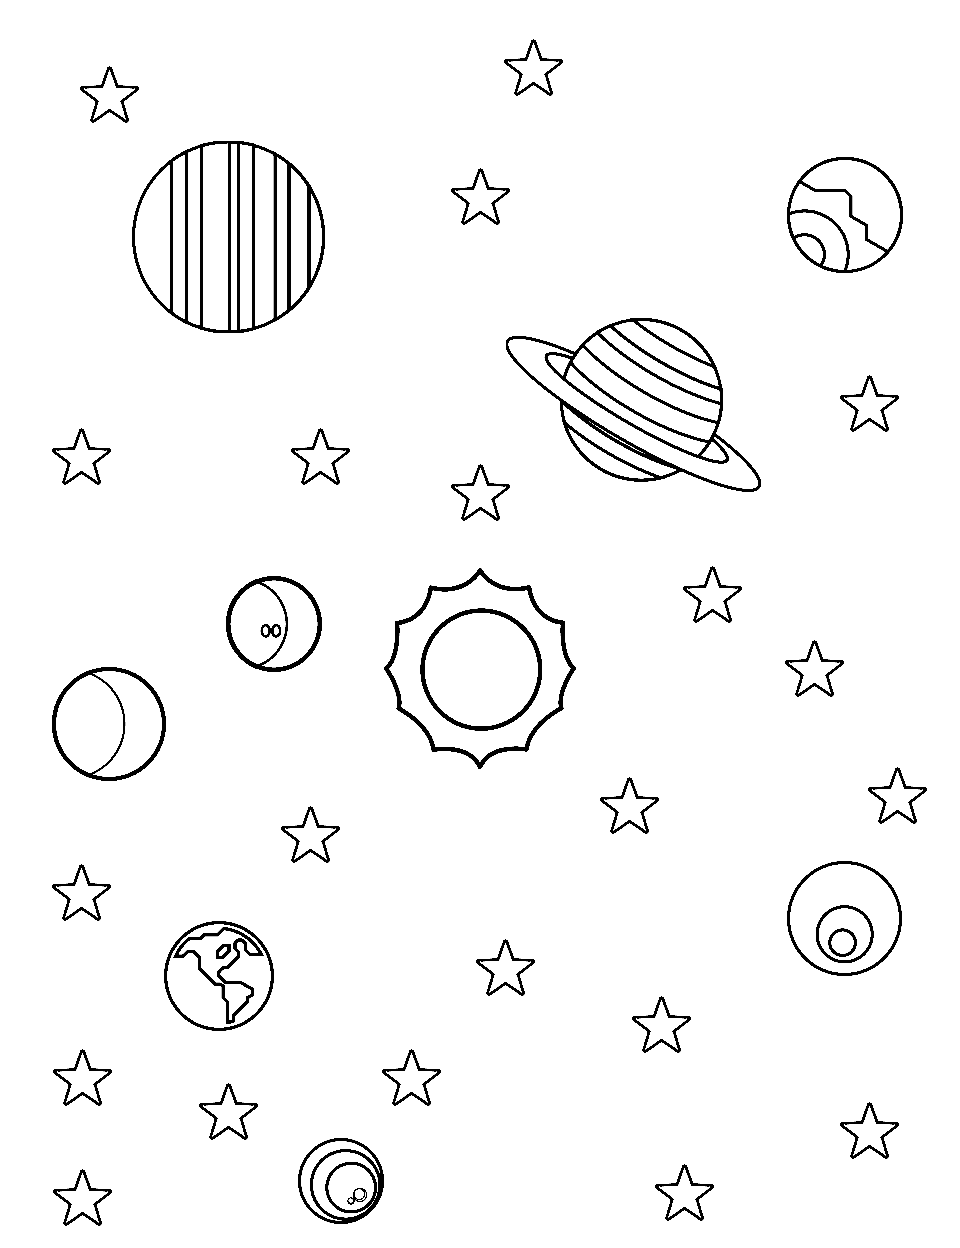 Simple Solar System Coloring Page - Simple drawing of the solar system for easy coloring.